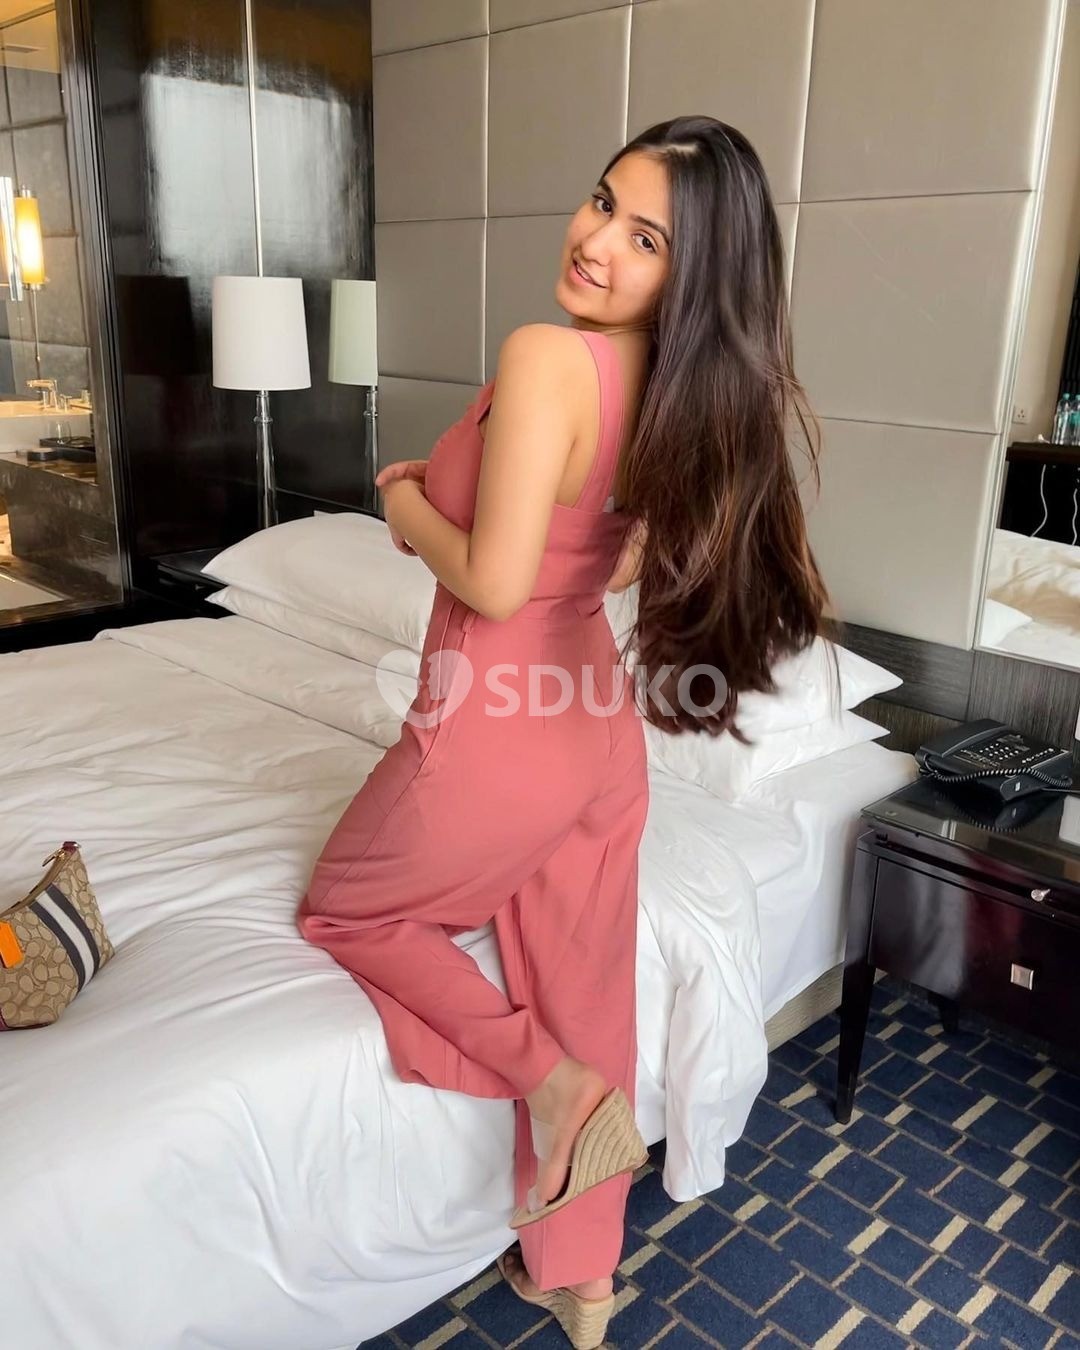 Jayanagar      ✅ 24x7 AFFORDABLE CHEAPEST RATE SAFE CALL GIRL SERVICE AVAILABLE OUTCALL AVAILABLE.......